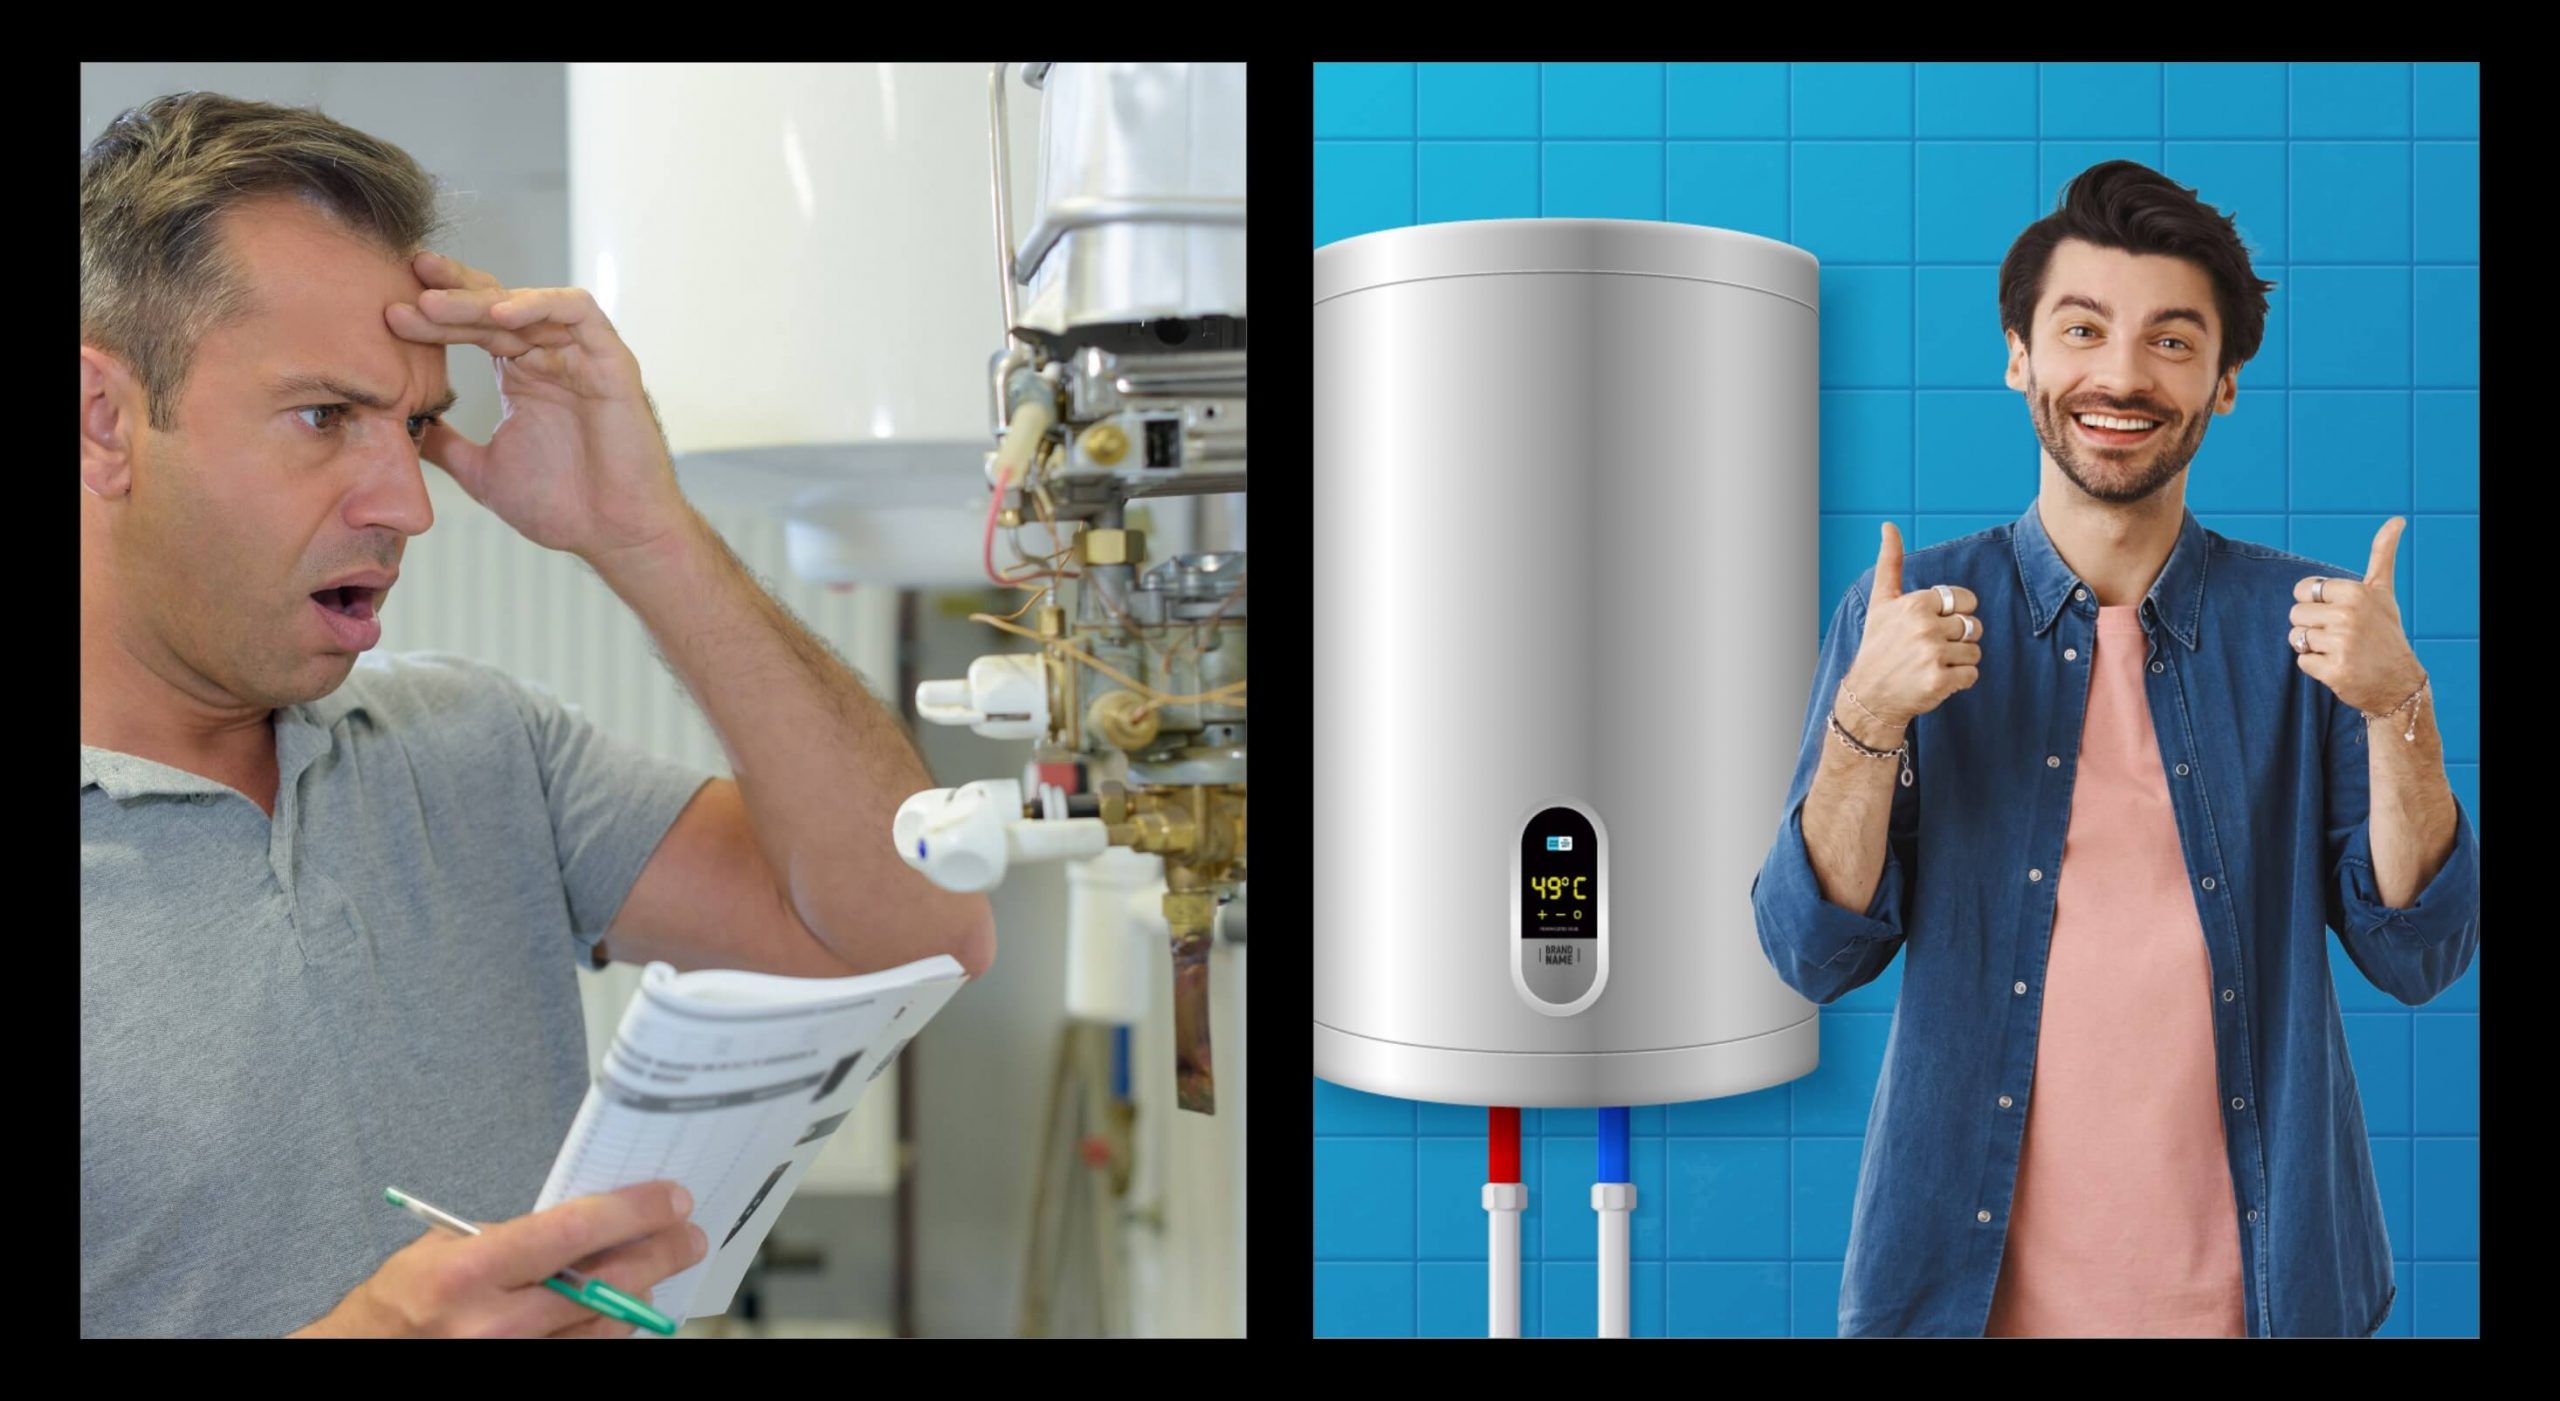 an image depicting the person who's struggling with frequent water heater breakdowns and is another person who's happy one his water heater is replaced.